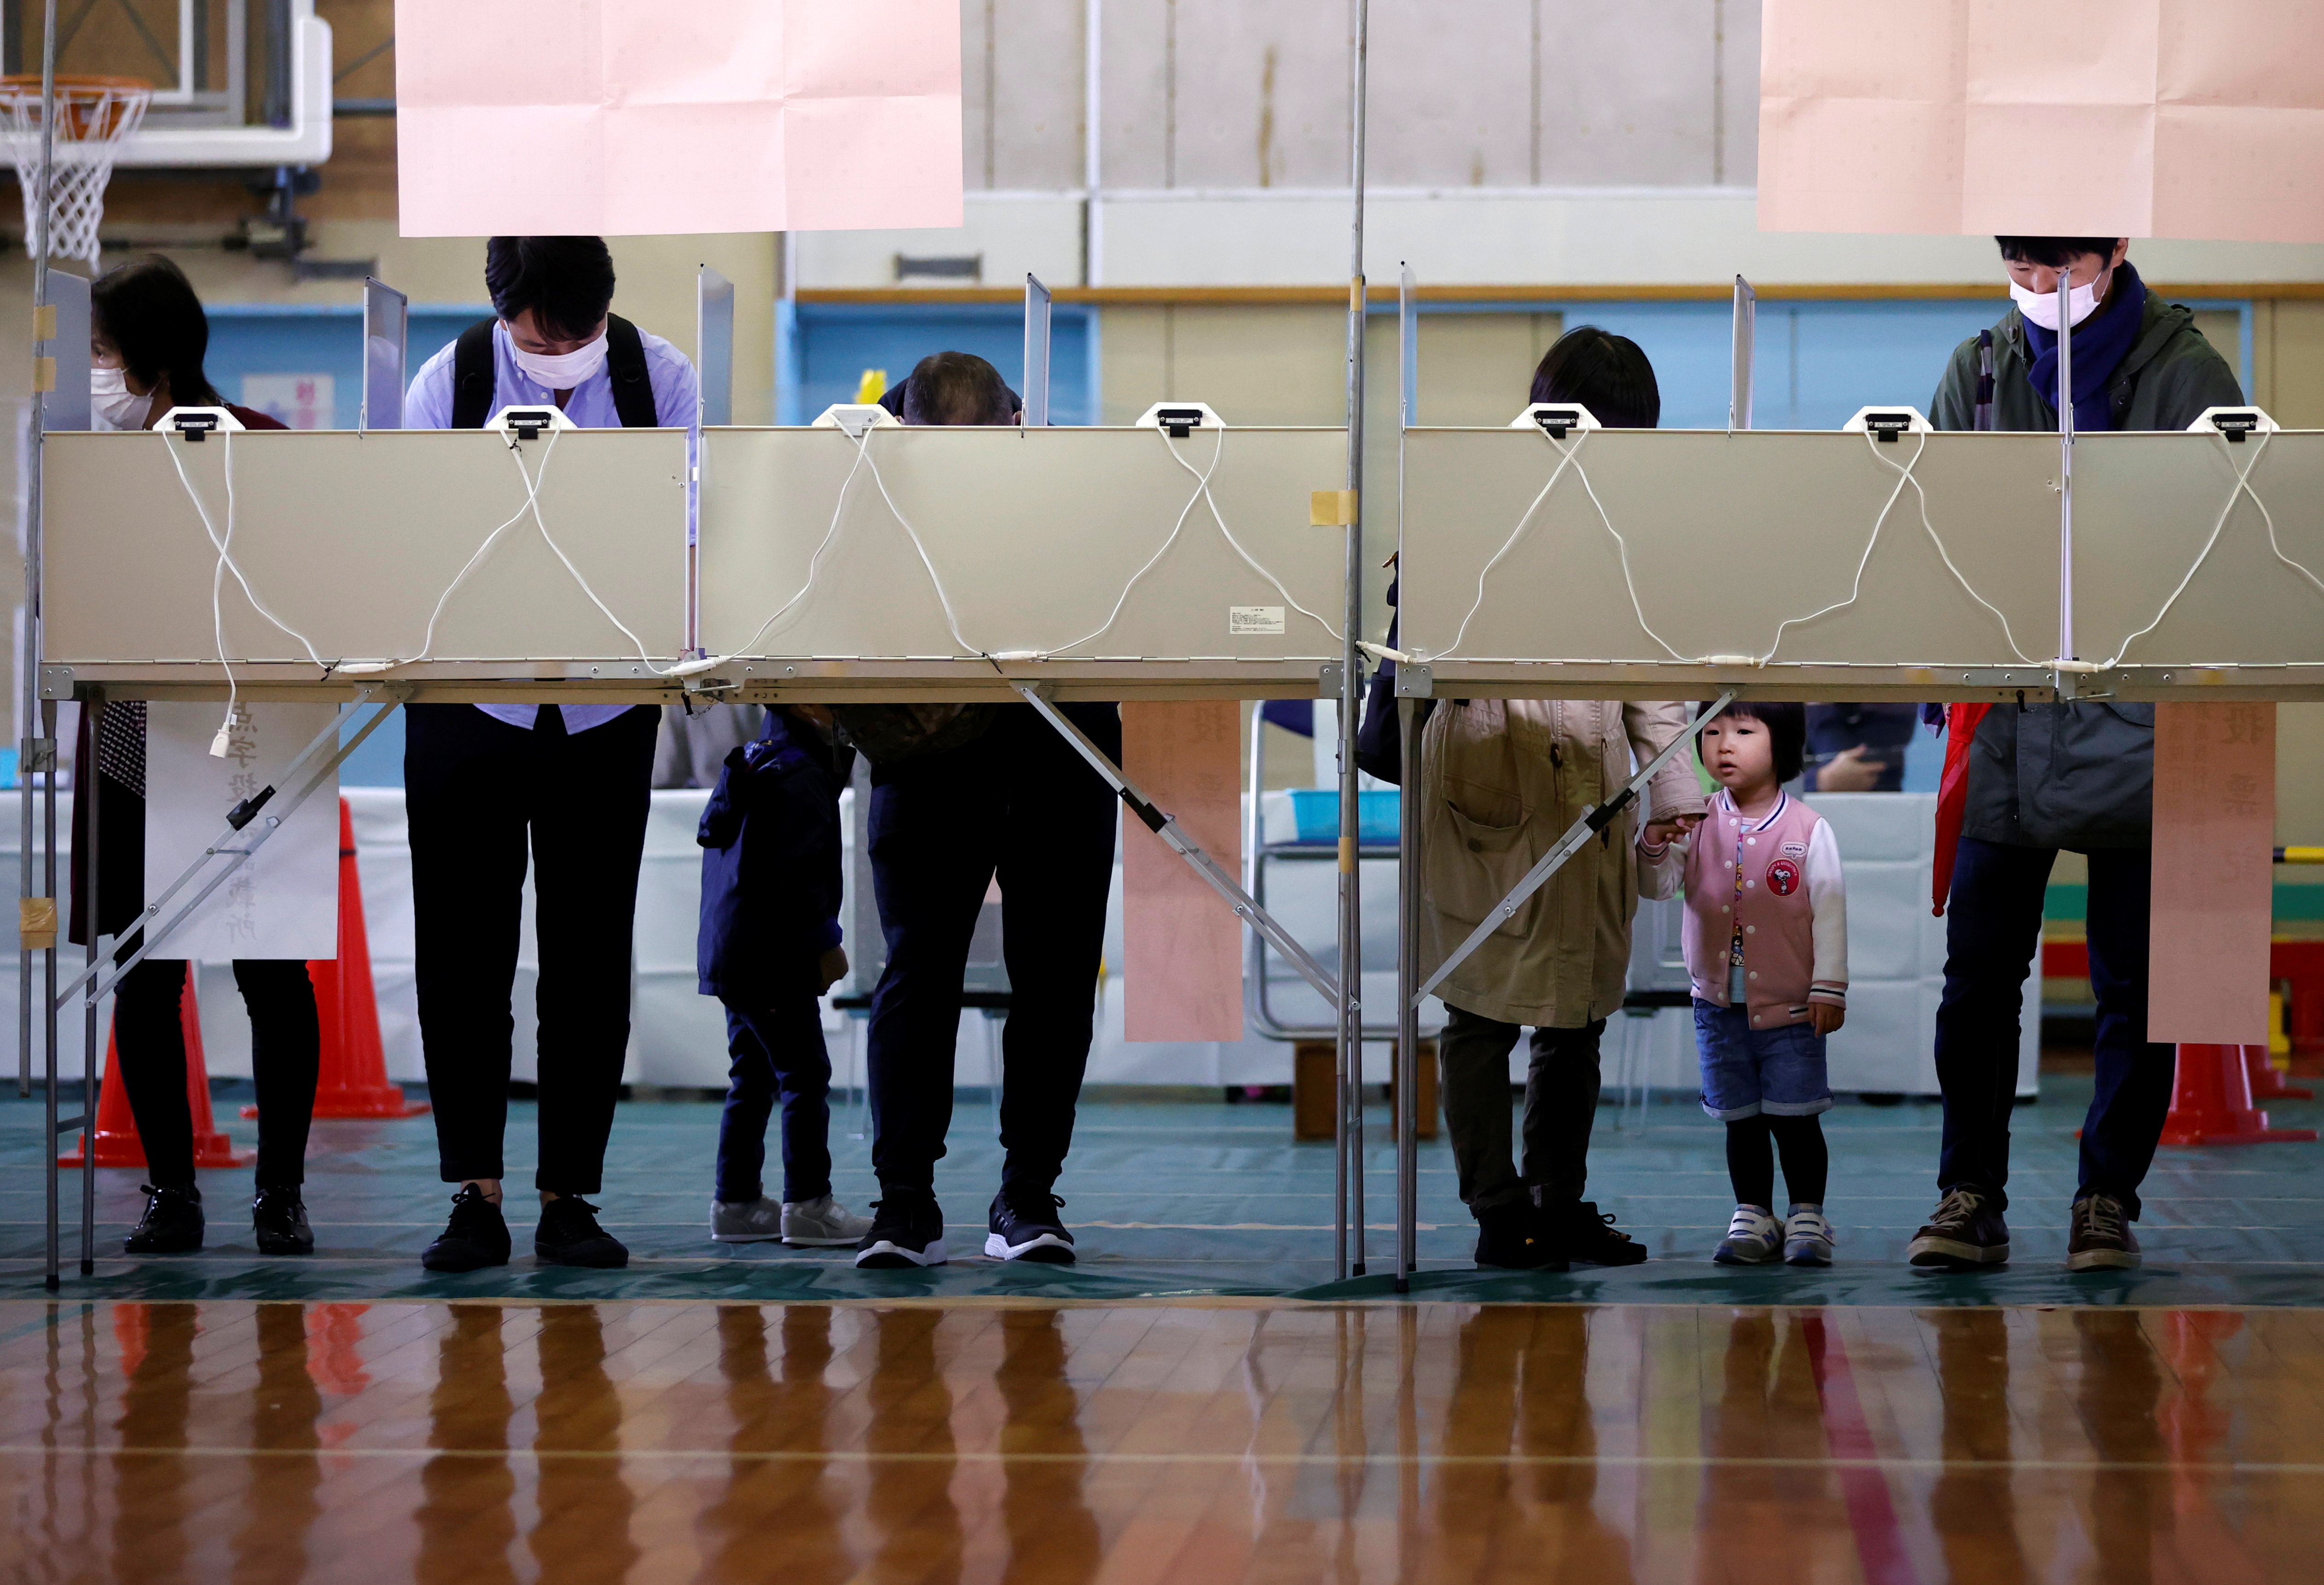 Voters prepare to cast their ballots in the lower house election at a polling station, amid the coronavirus disease (COVID-19) pandemic, in Tokyo